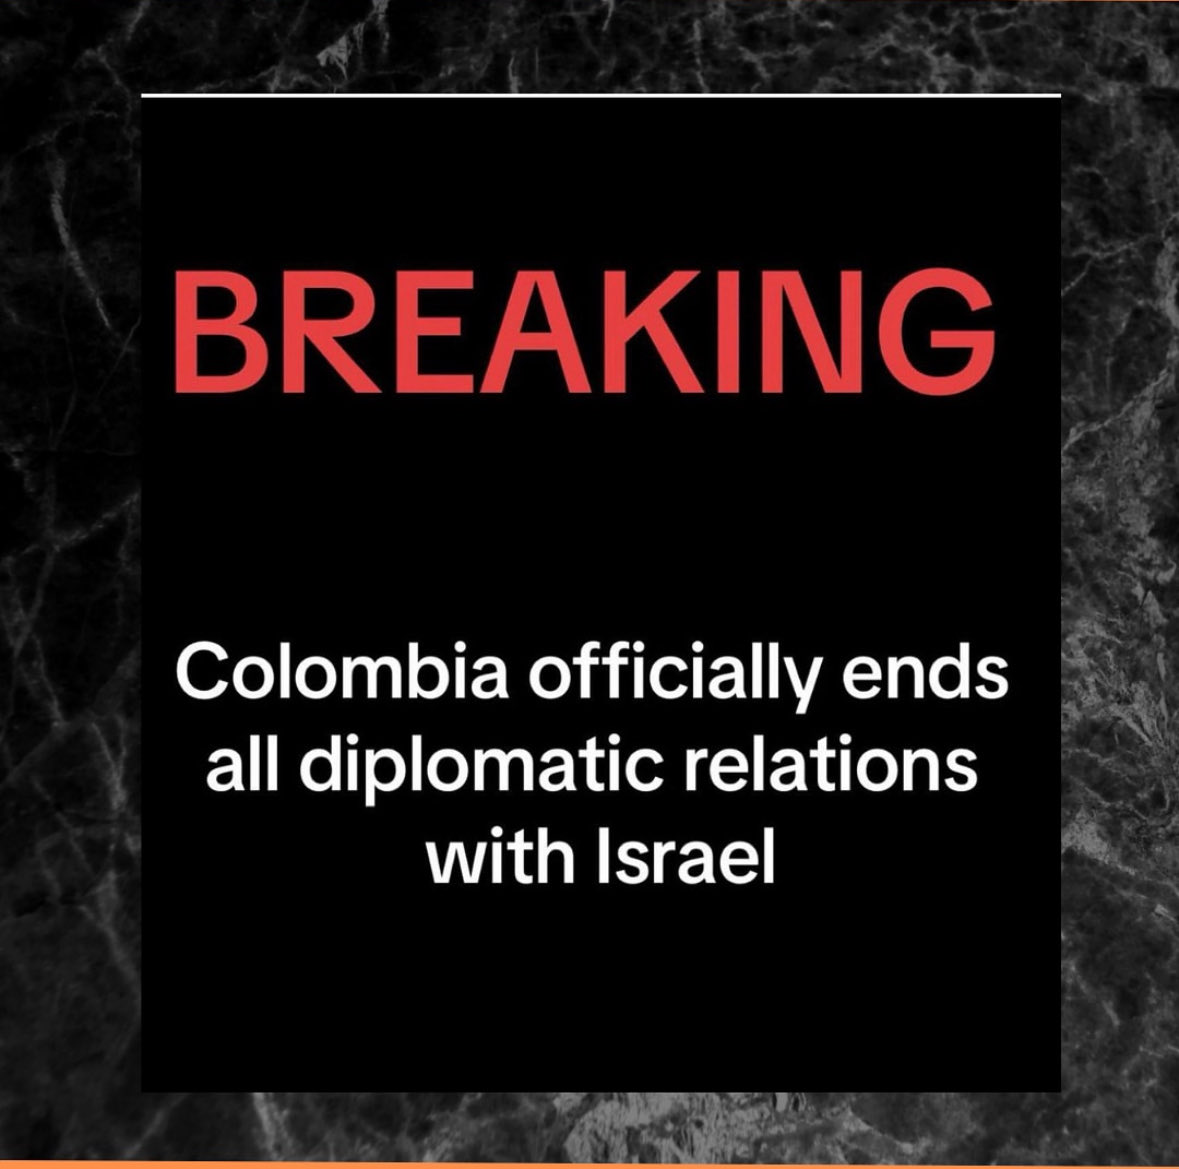 One Colombia shows far more moral courage than the other @Columbia.⤵️